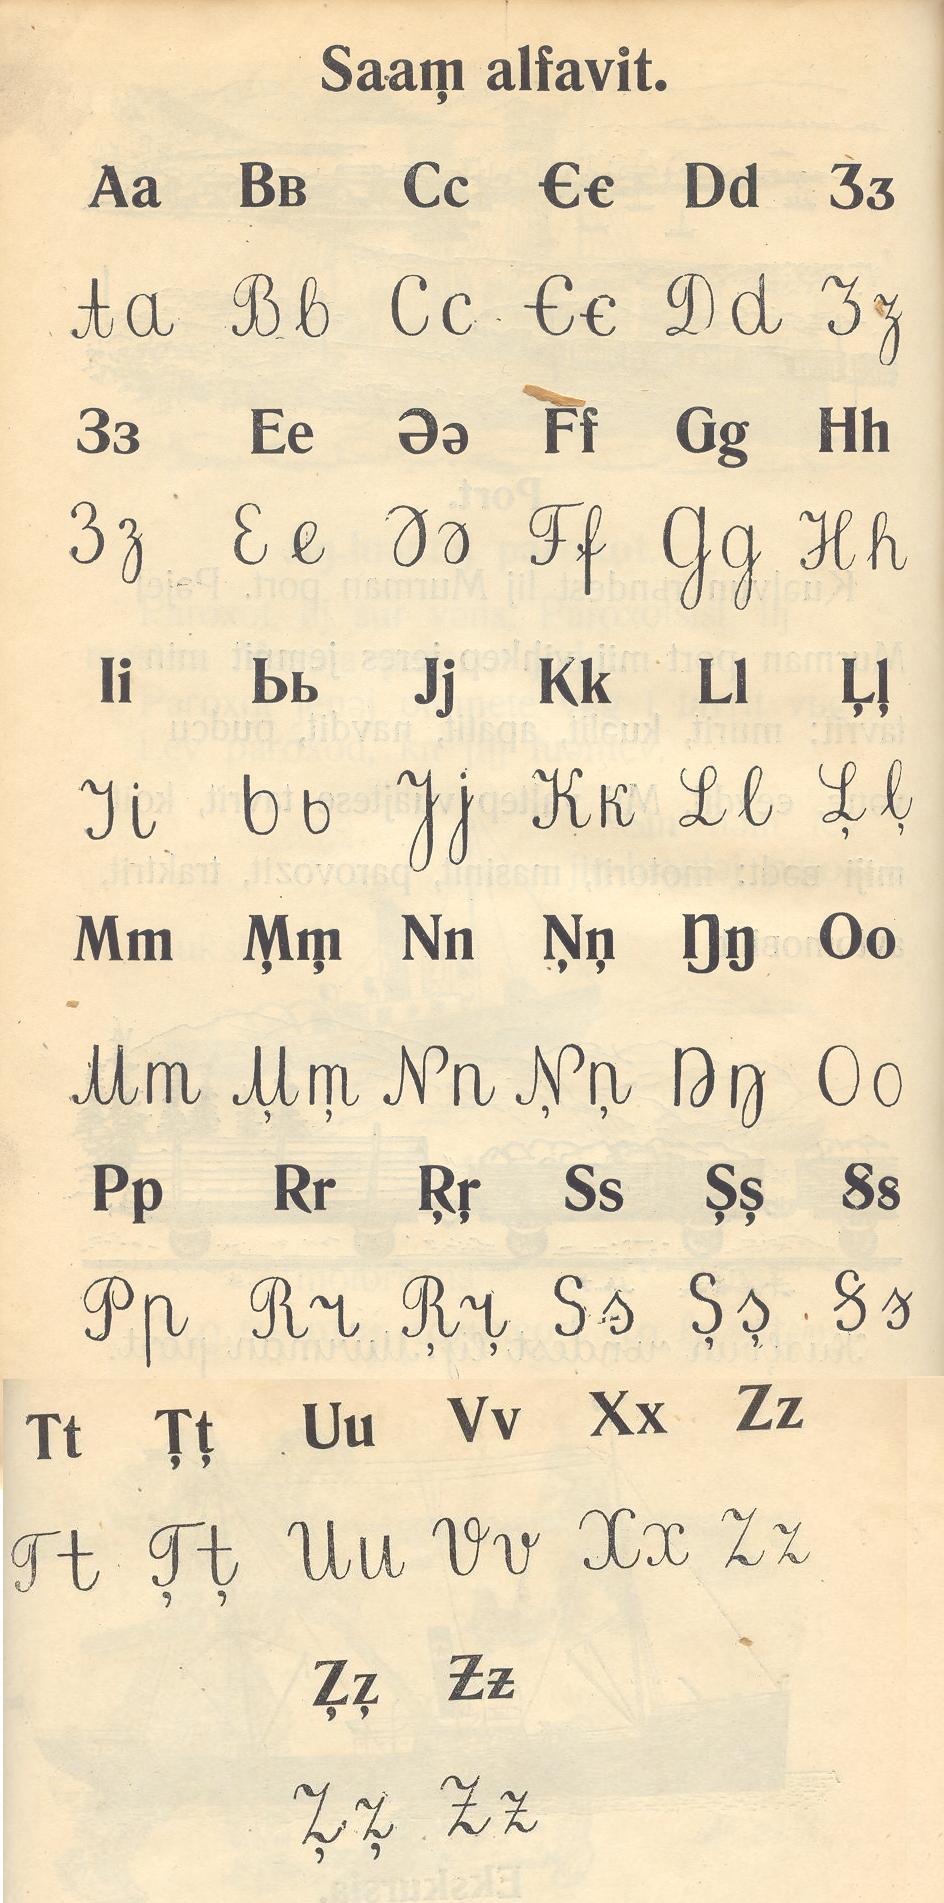 A Saami alphabet primer from USSR, 1933. Via Wikimedia Commons